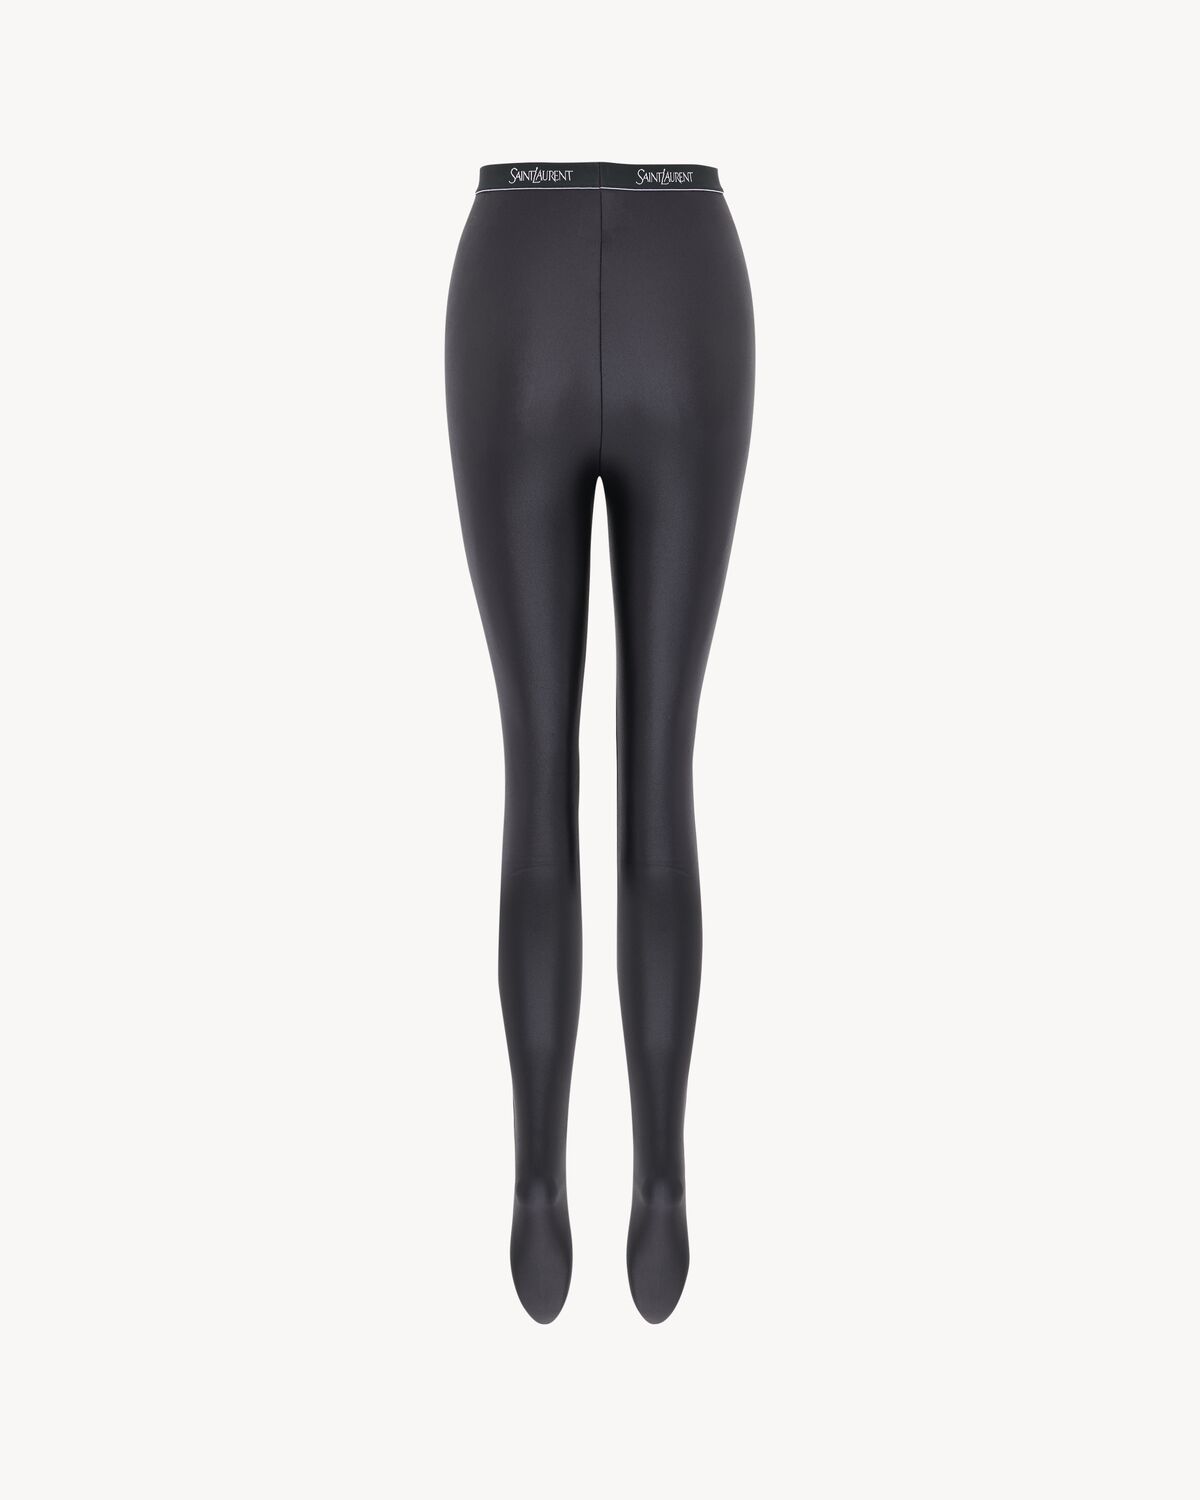 SAINT LAURENT tights in shiny jersey